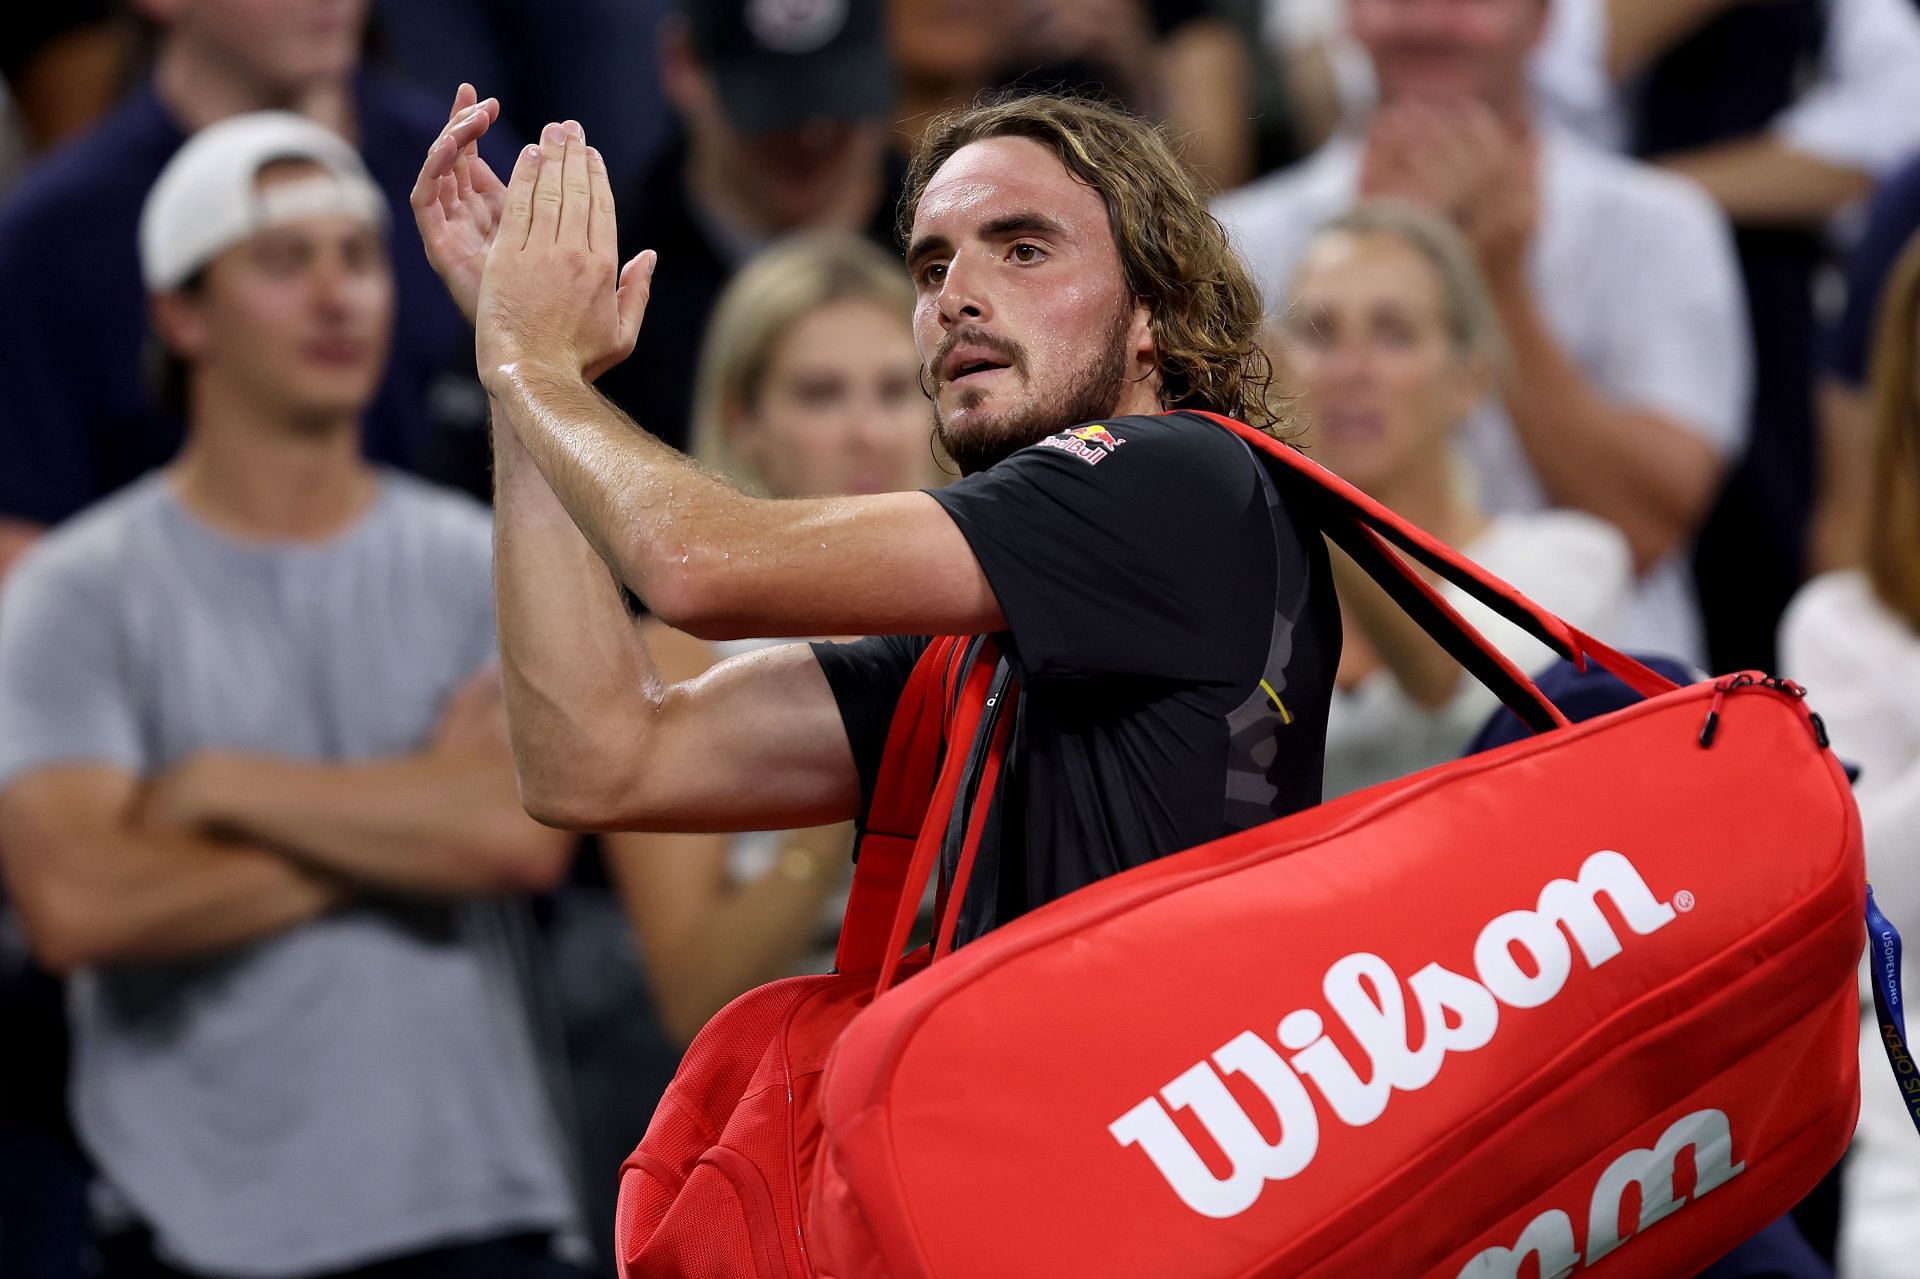 Stefanos Tsitsipas lost in the first round at the US Open.